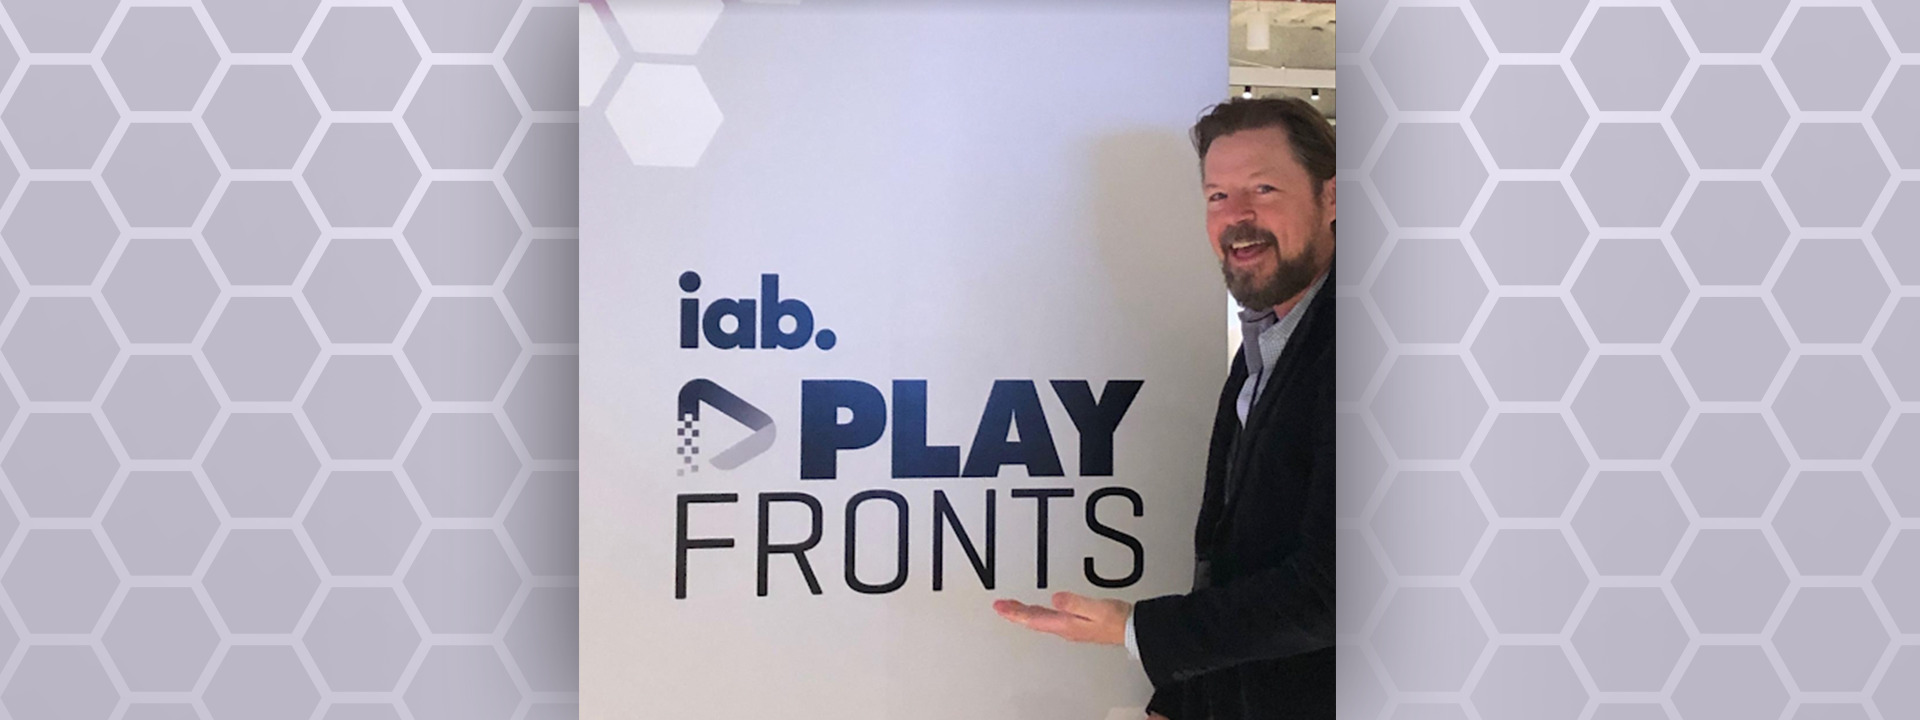 Ben Johnson standing in front of PlayFronts IAB sign